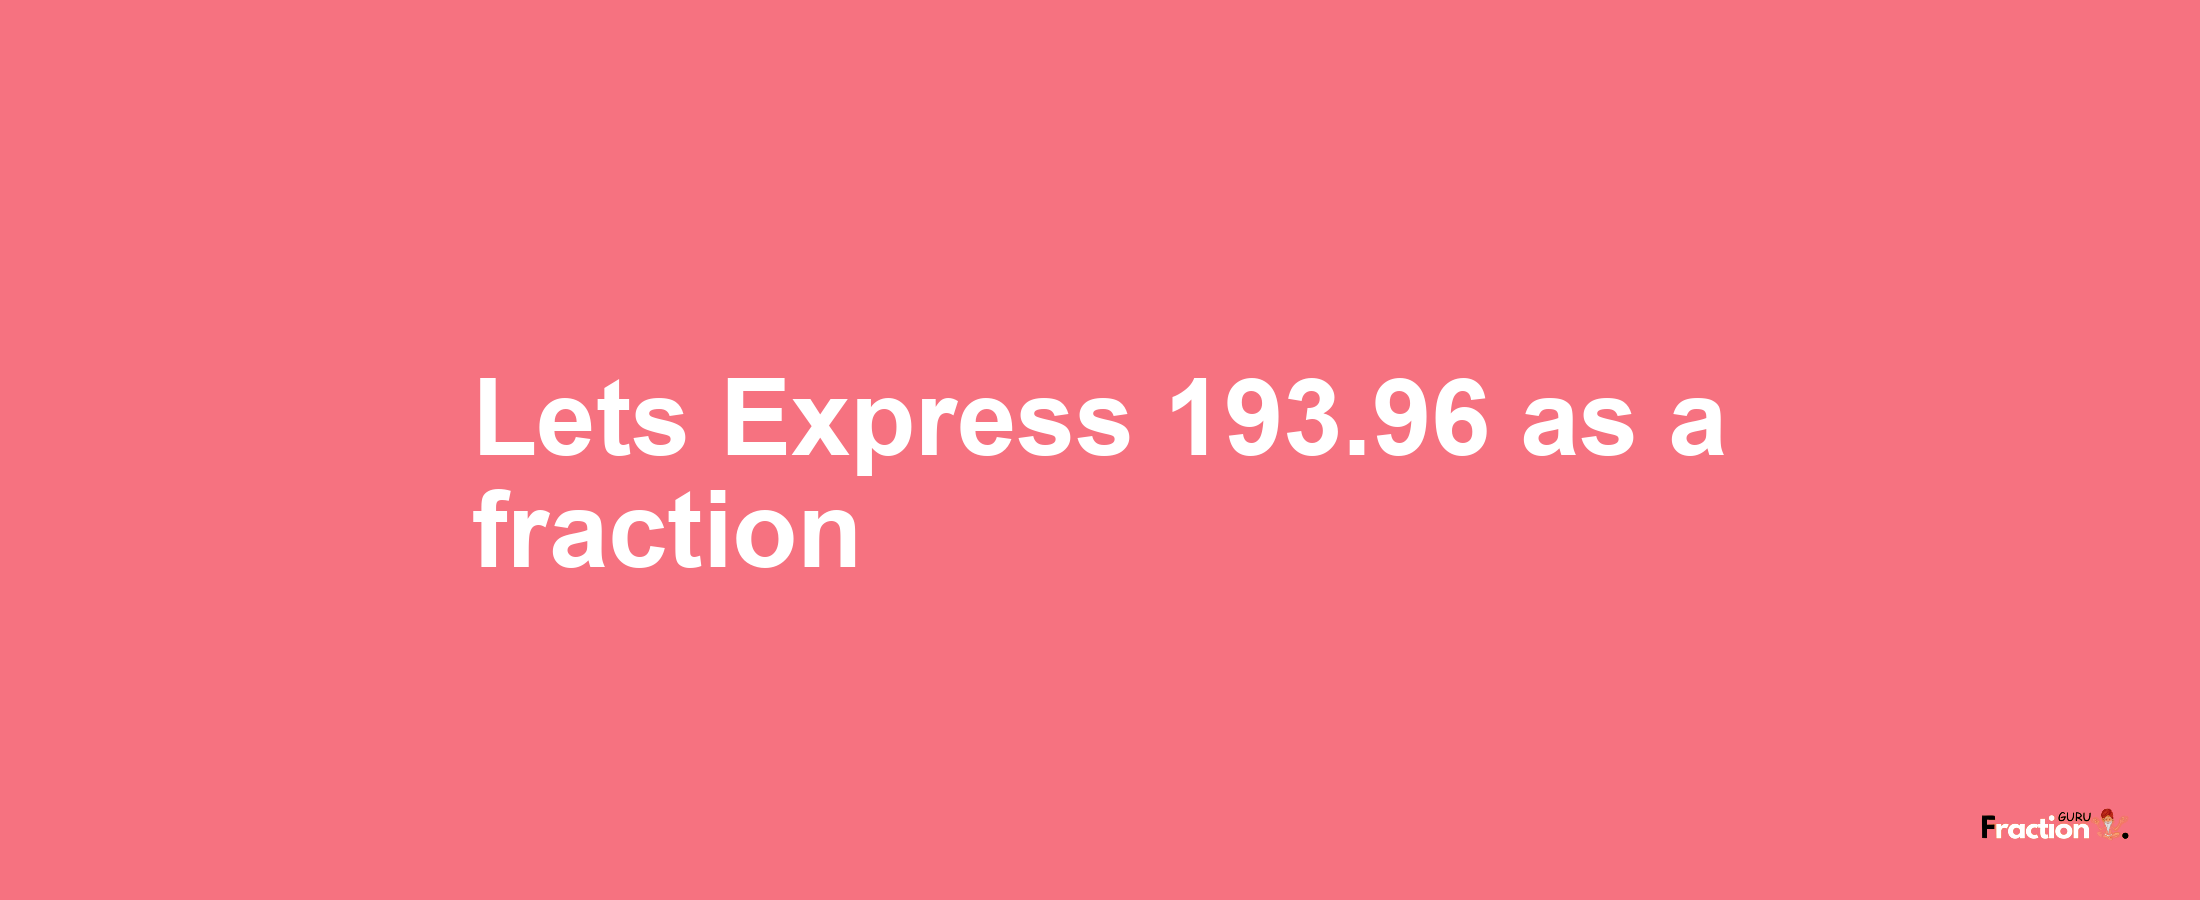 Lets Express 193.96 as afraction